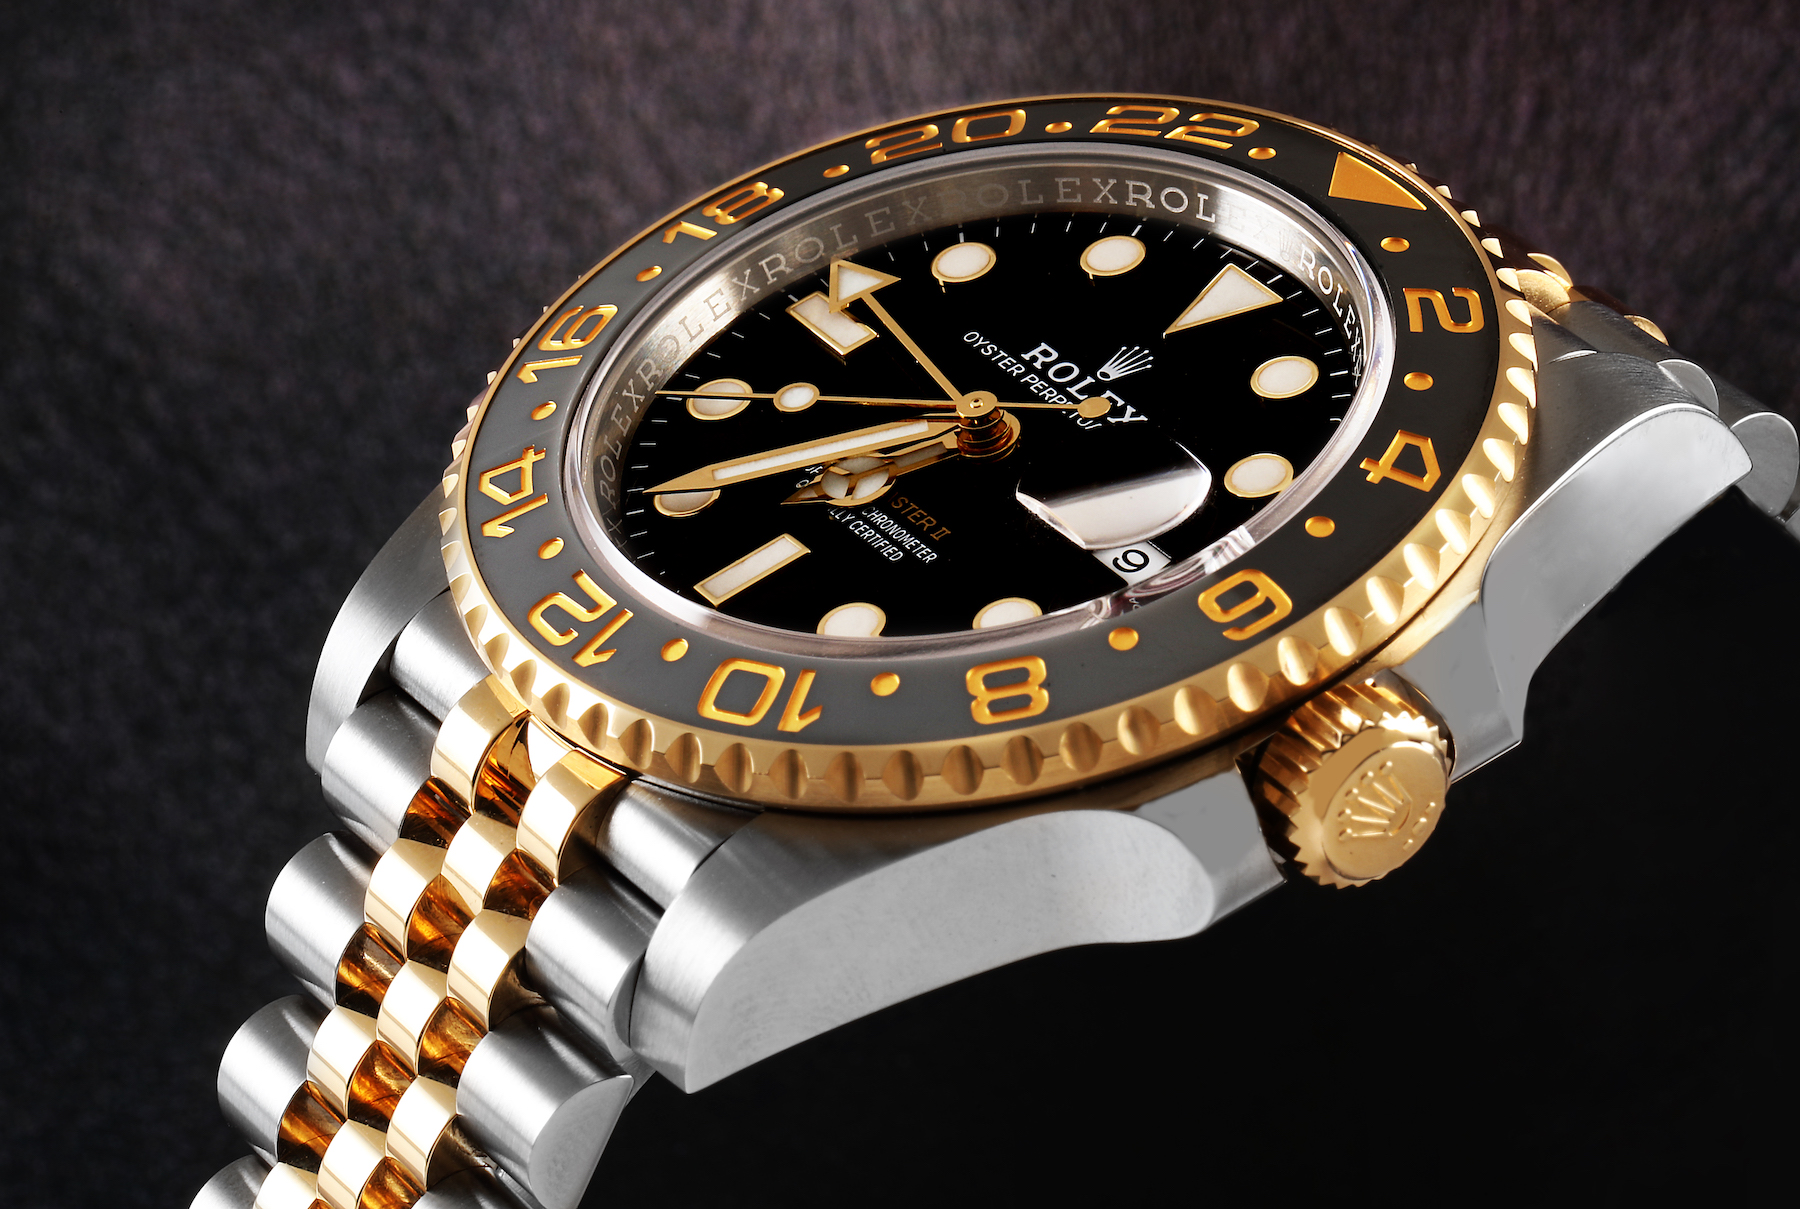 Every Rolex Bezel Type Explained - Rolex GMT Master II Steel and Gold 126713 GRNR